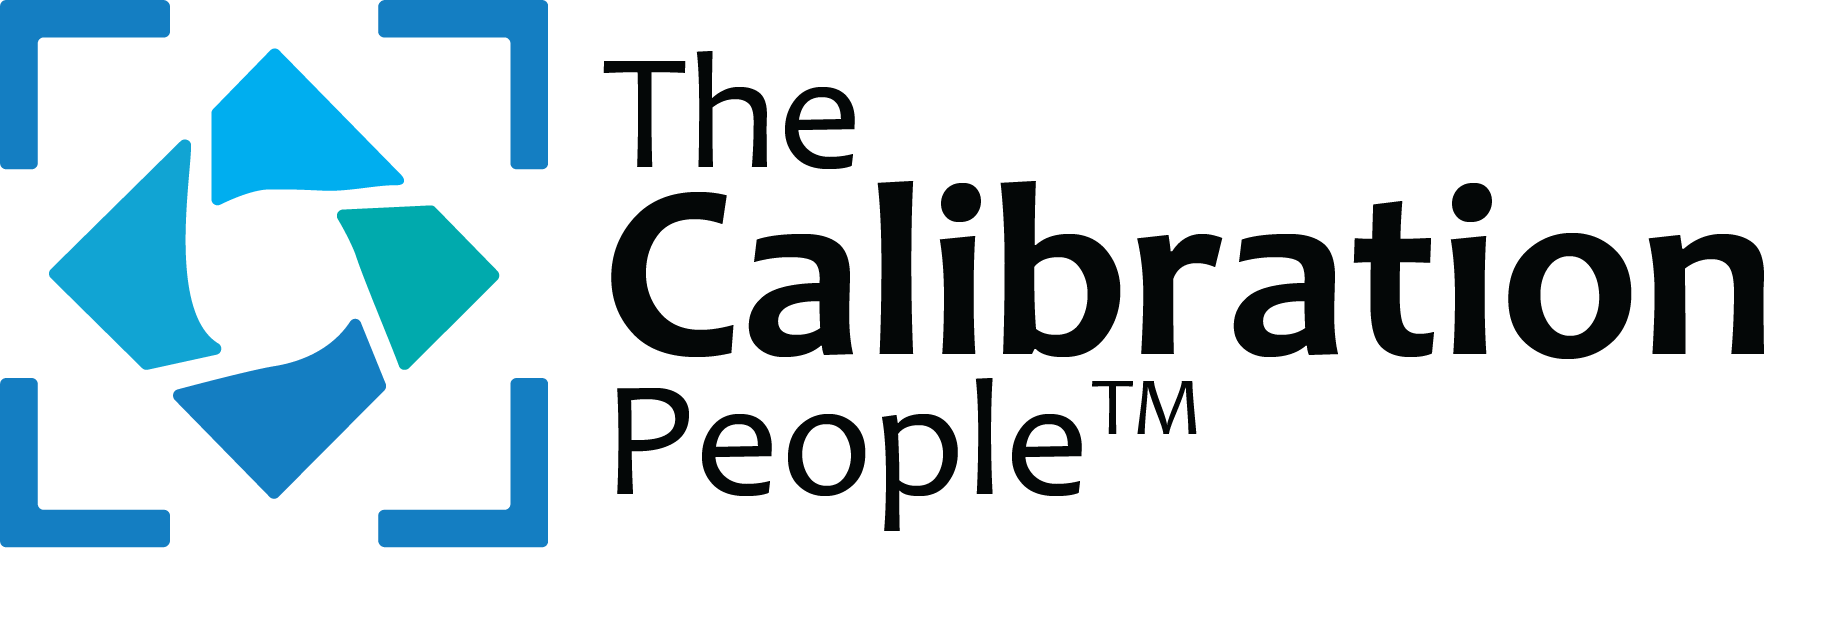 The Calibration People